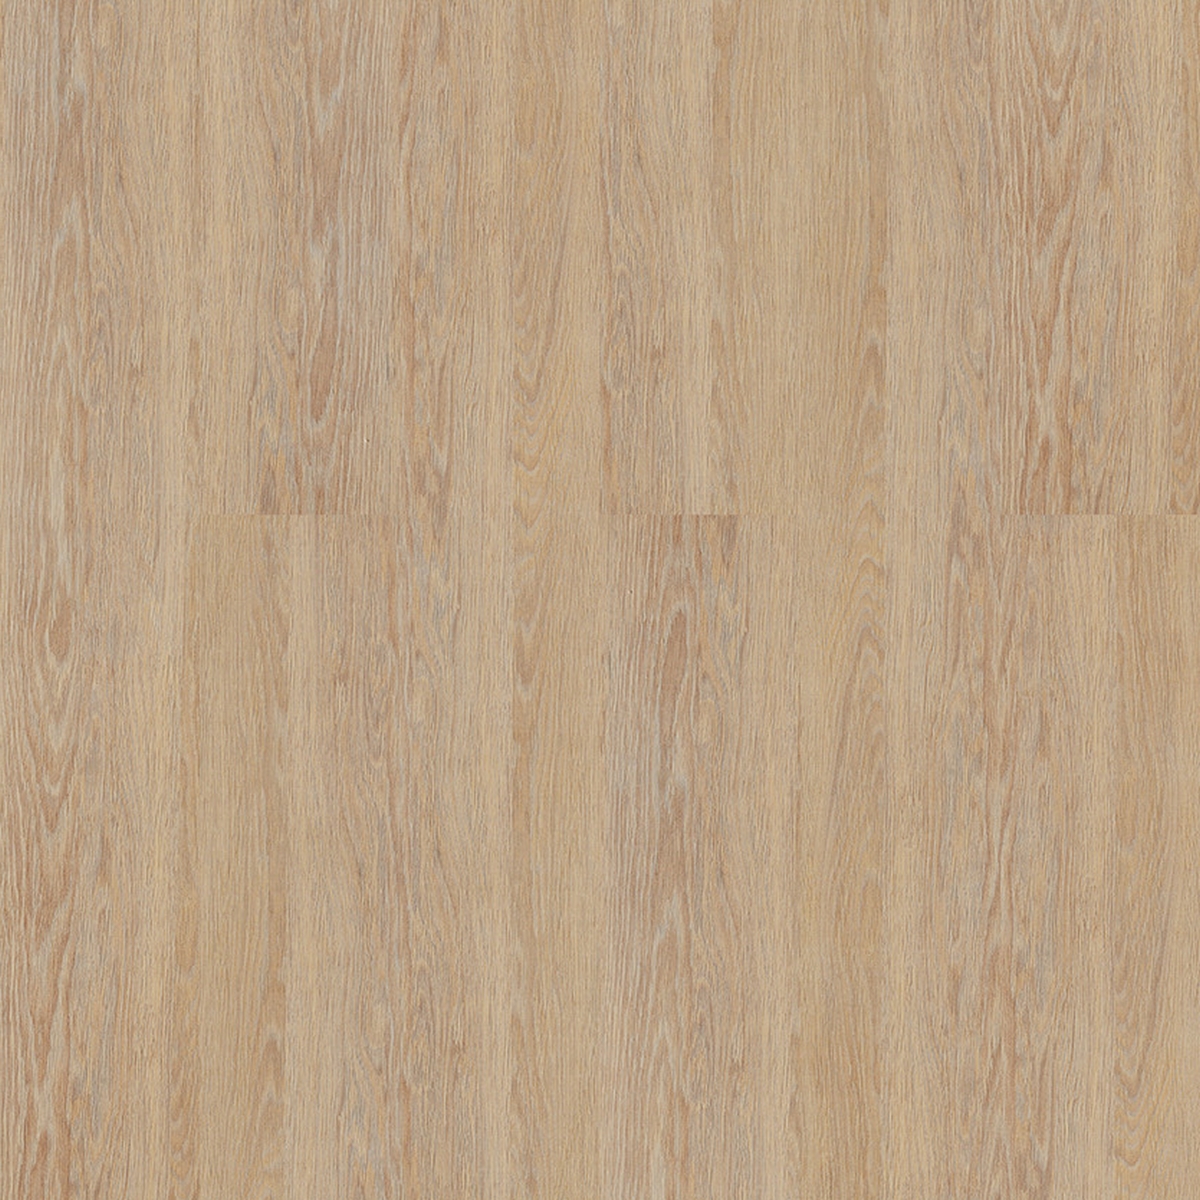 Wise wood Inspire 700 Contempo rust